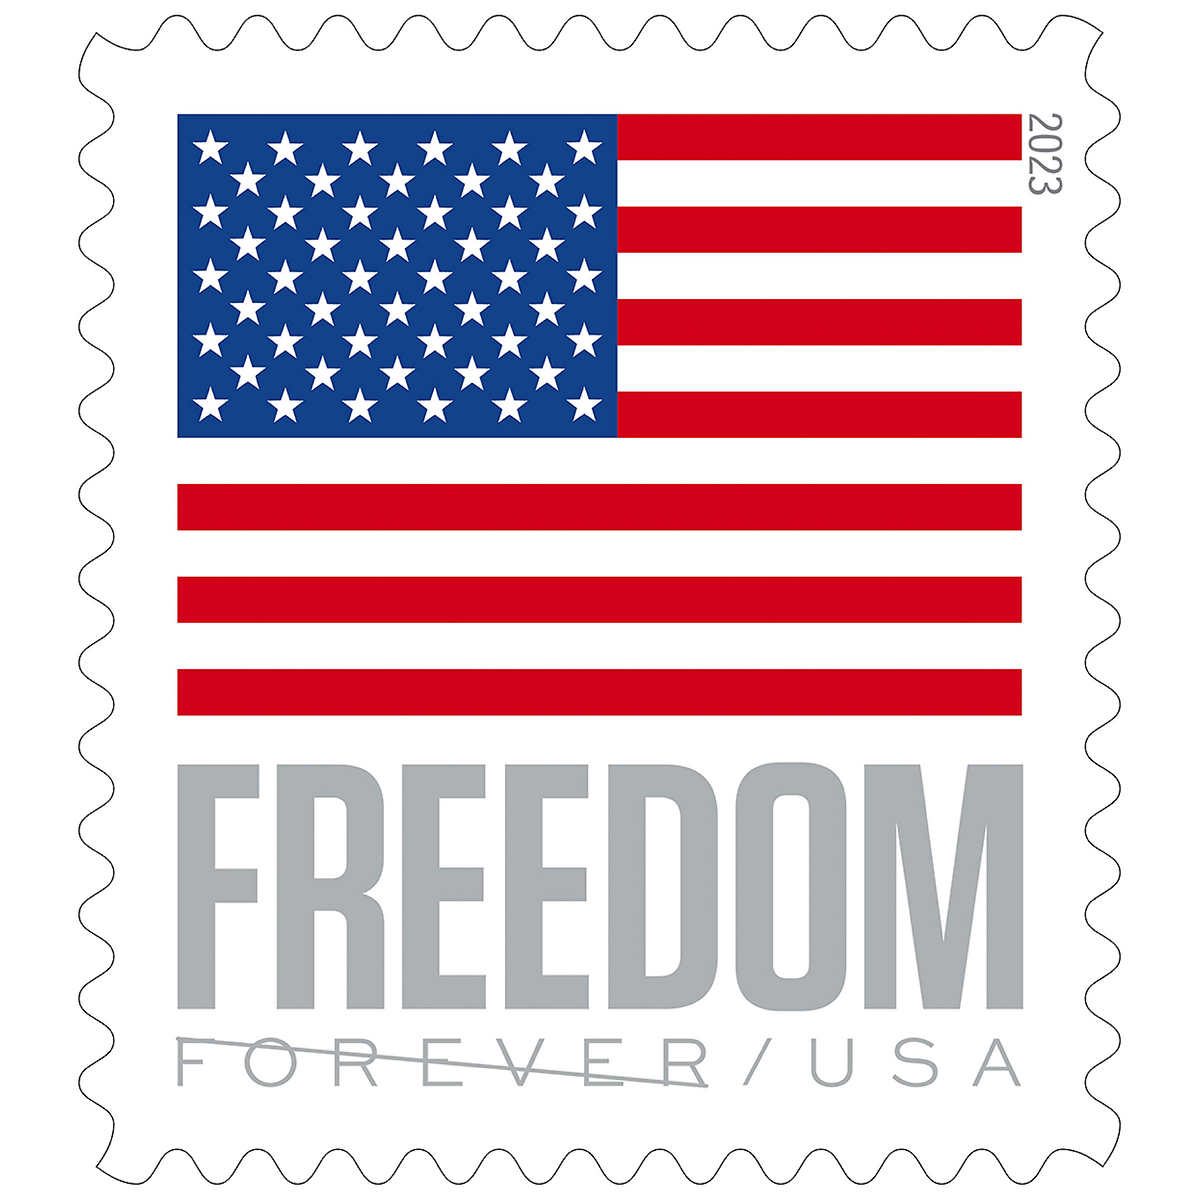 How much does a first class postage stamp cost today Stamps Com Usps Metered Mail First Class Stamp Discount